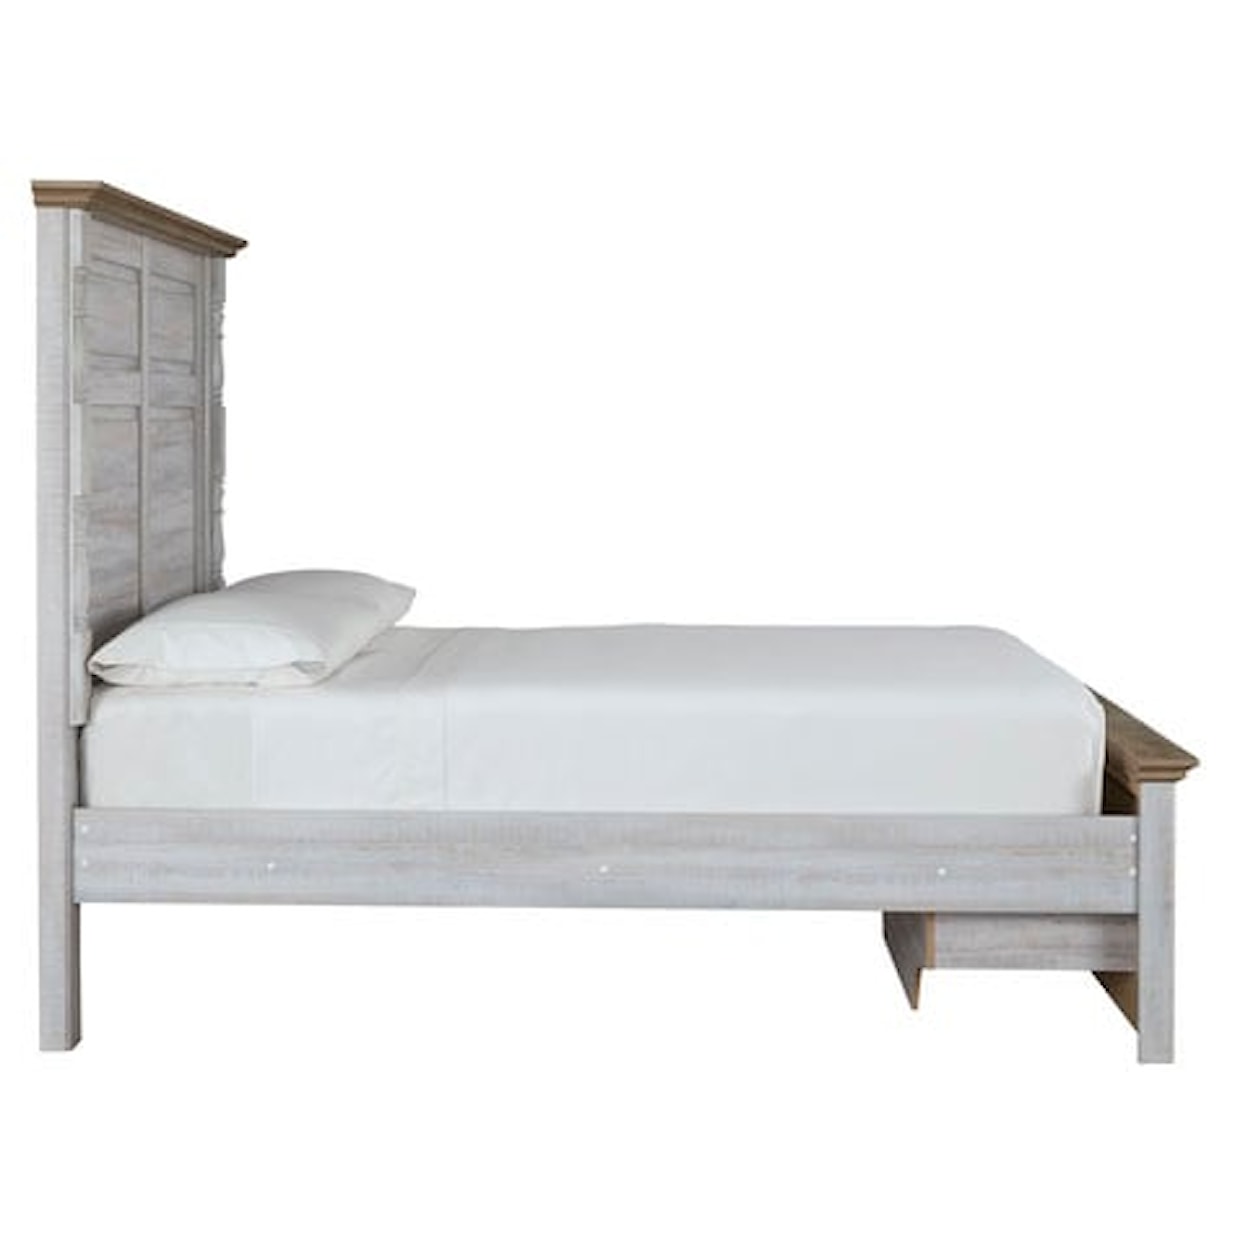 Signature Design by Ashley Furniture Haven Bay Queen Panel Storage Bed